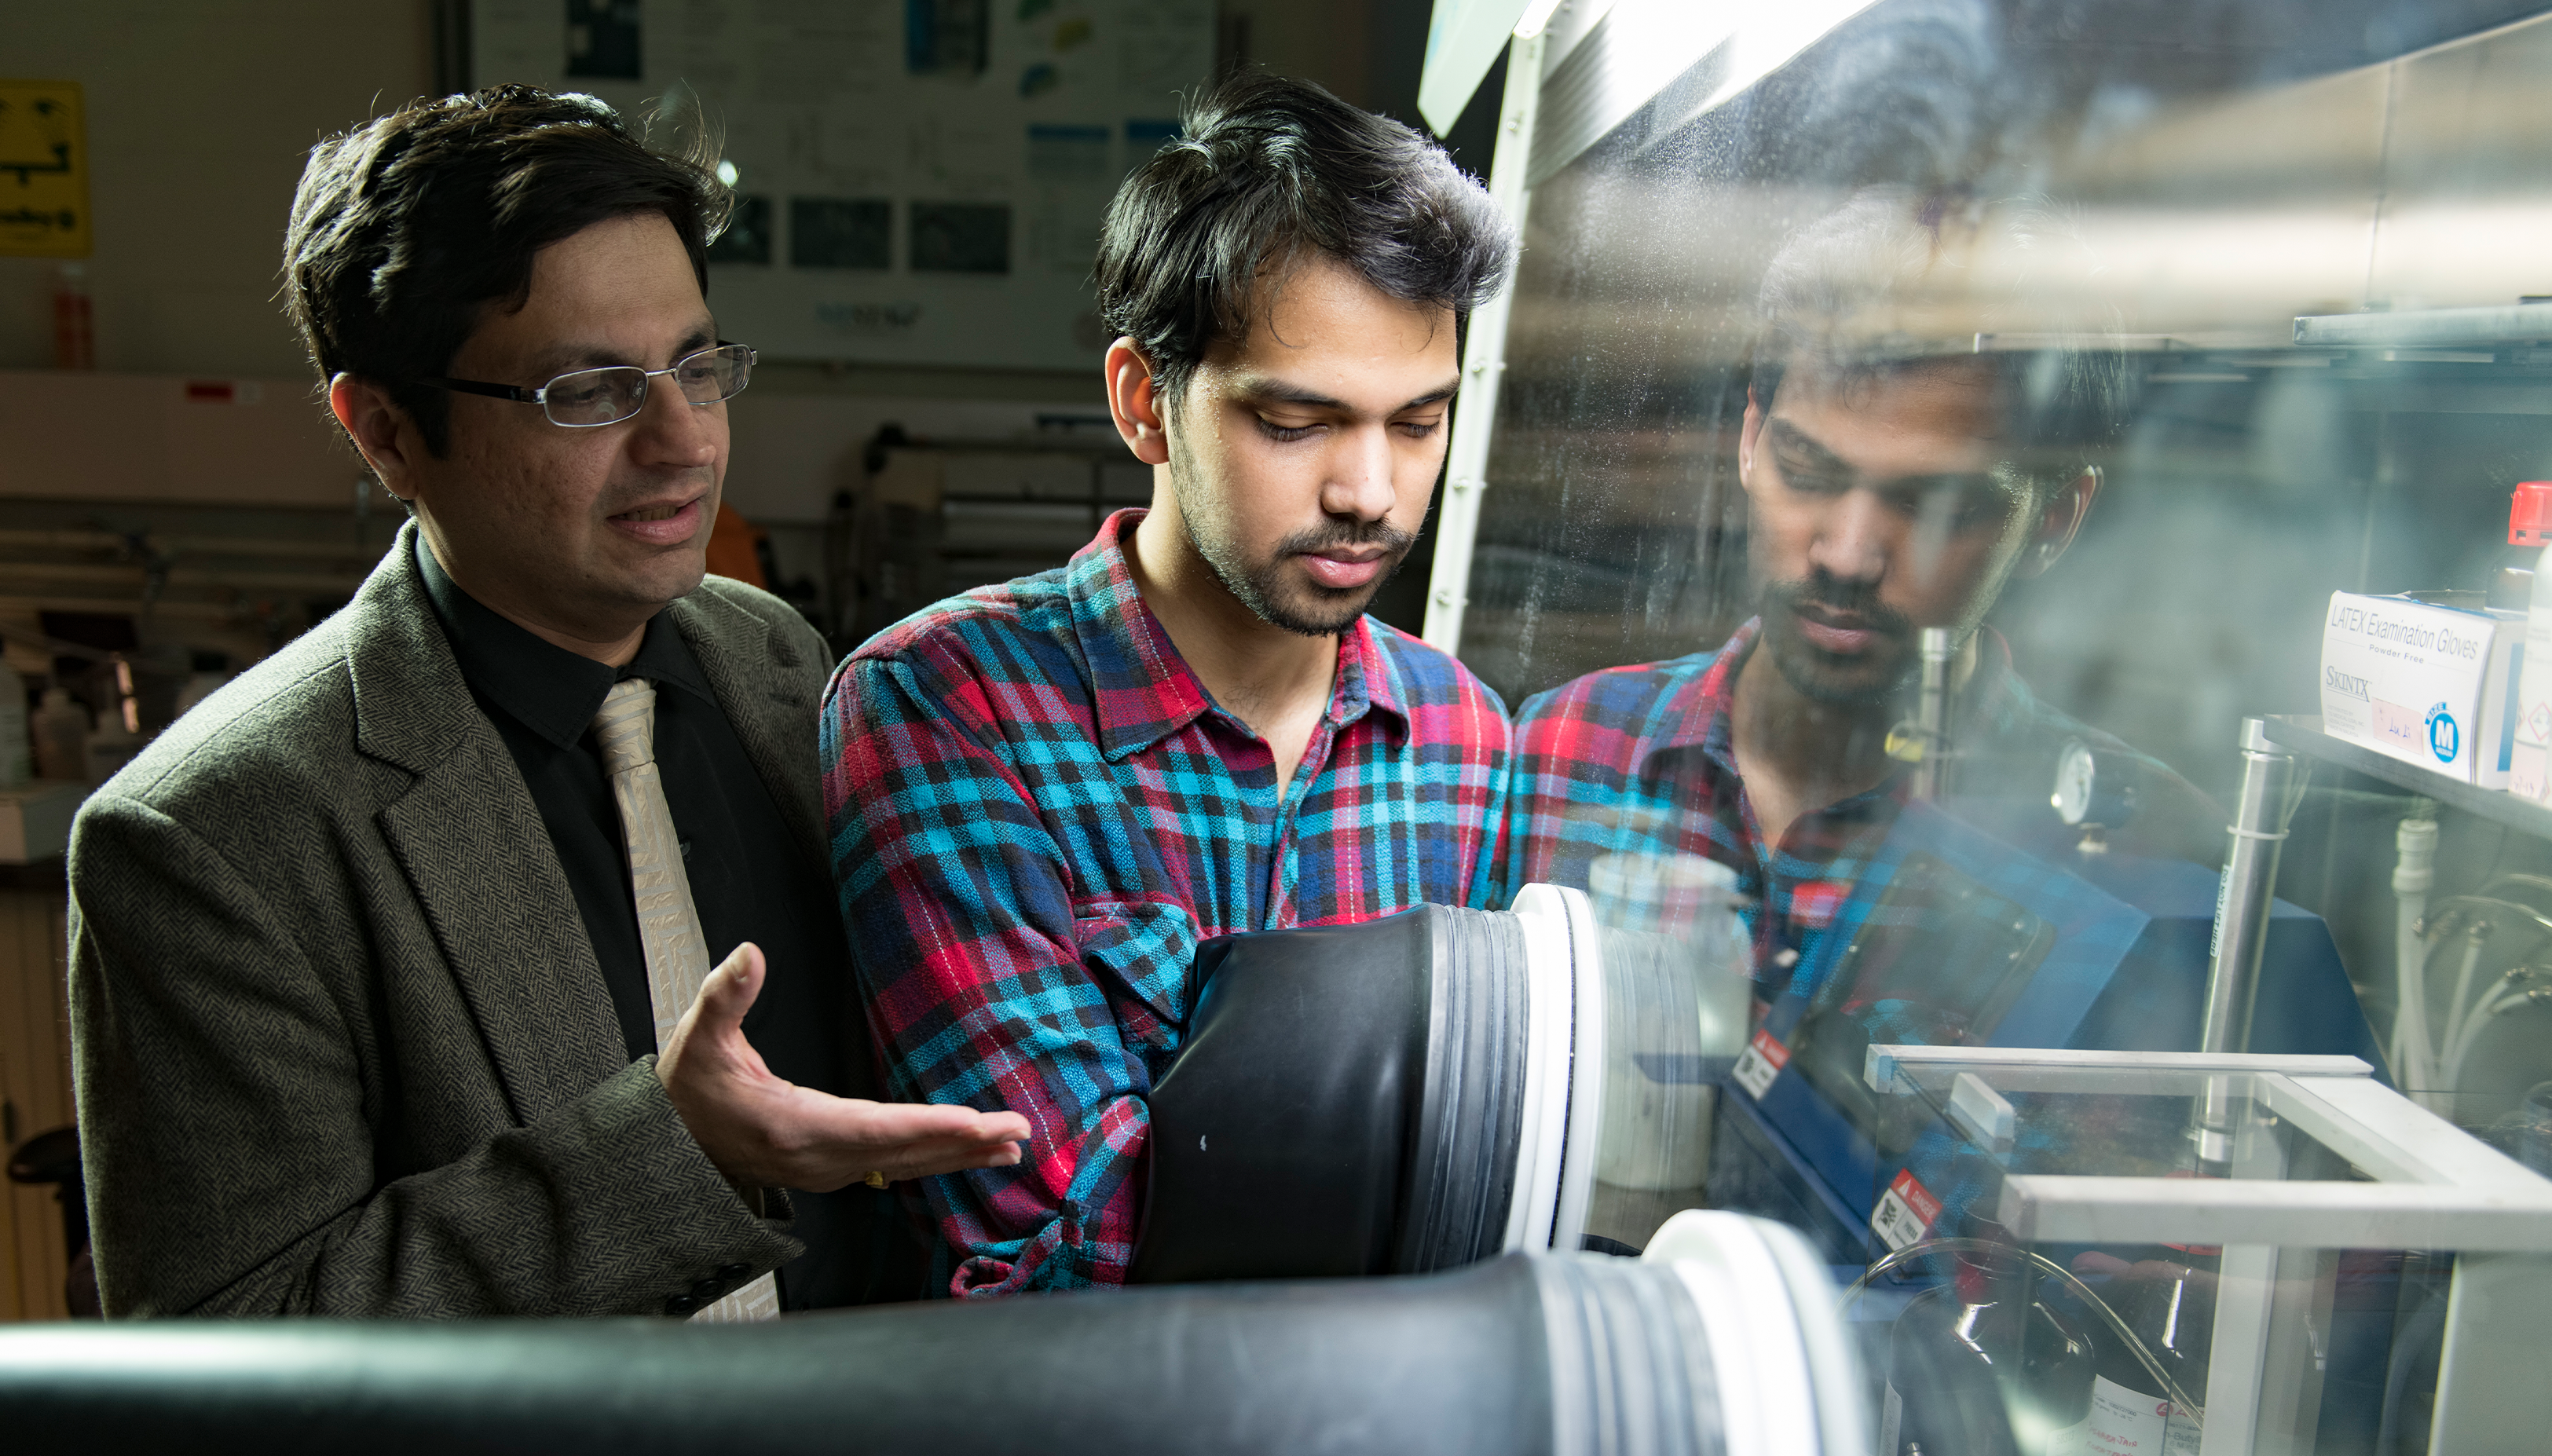 Nikhil Koratkar oversees work being done by a student researcher